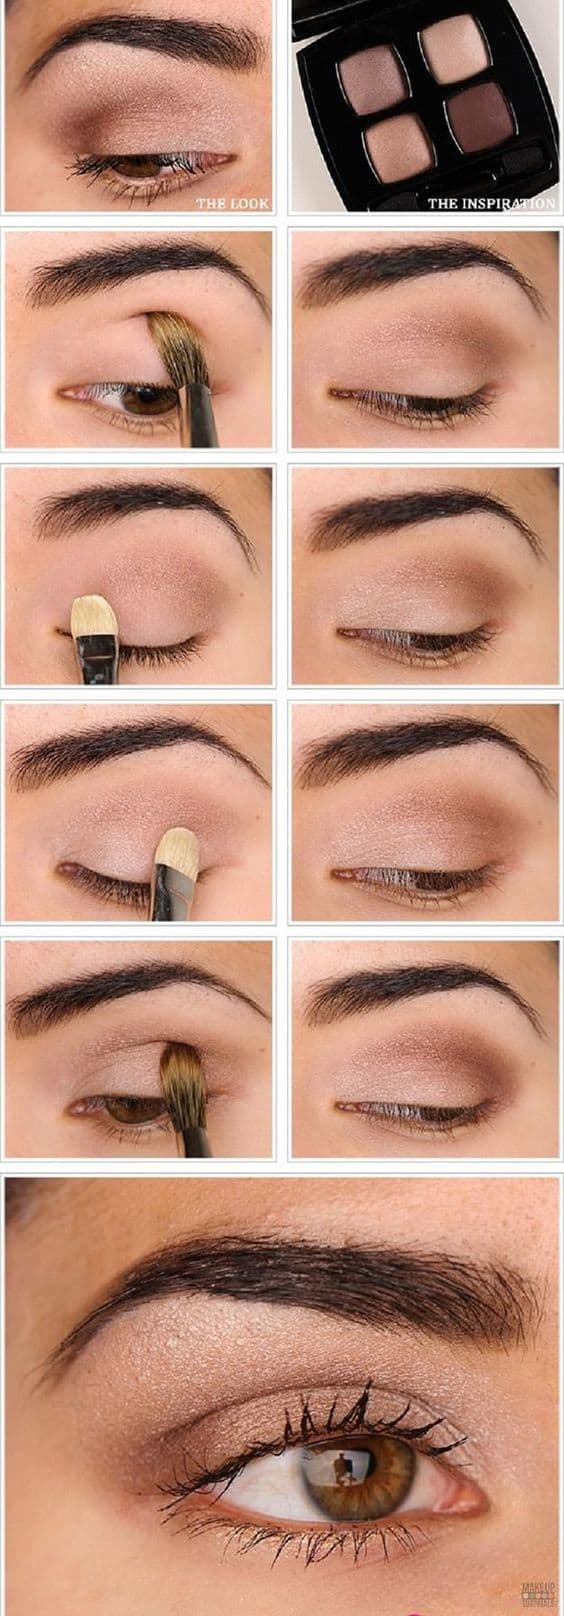 How To Do Makeup For Brown Eyes 10 Makeup Ideas For Brown Eyes Ritely